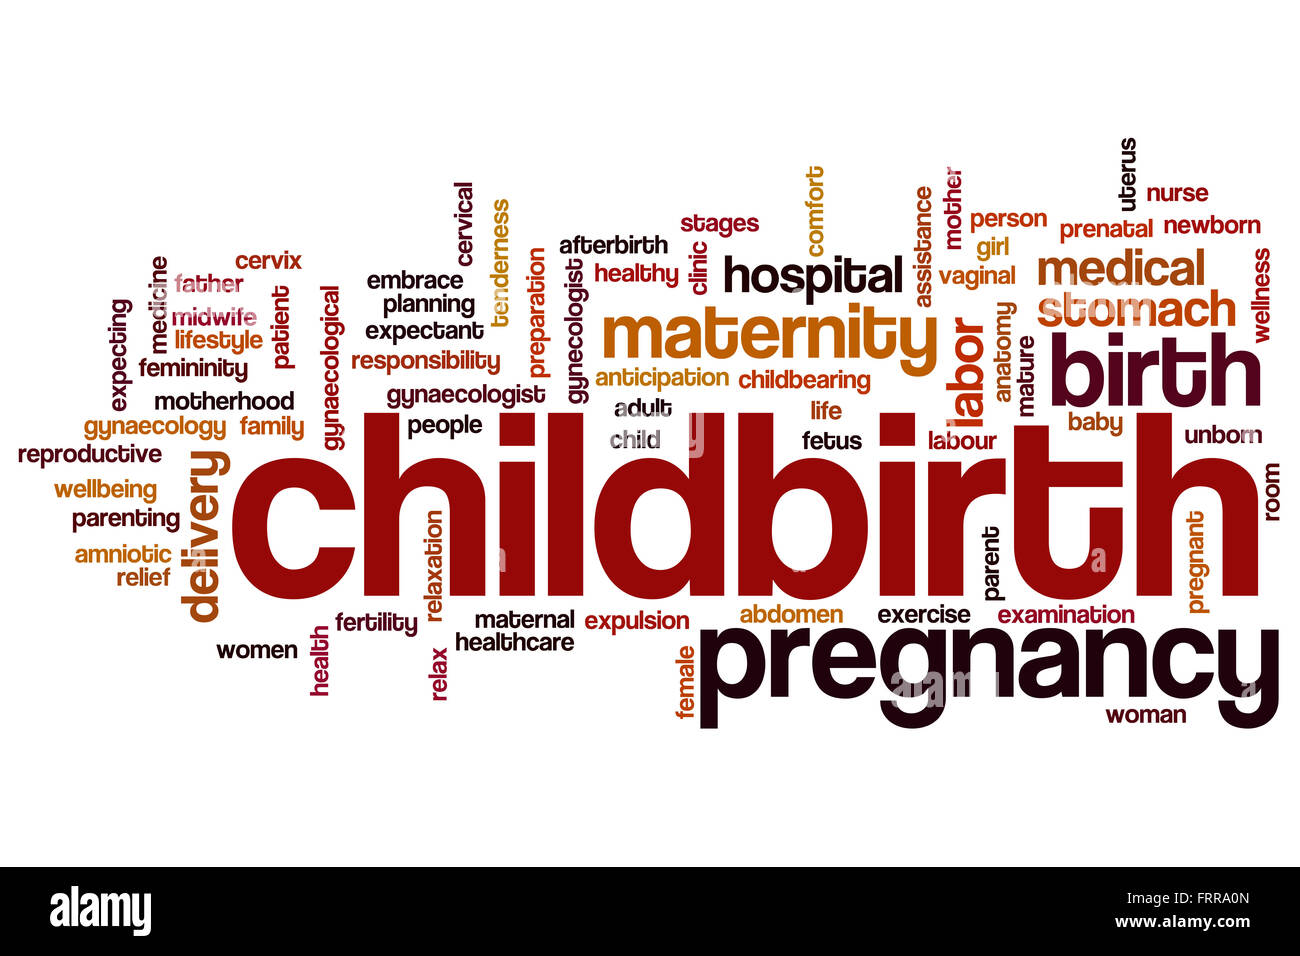 Childbirth word cloud concept Stock Photo